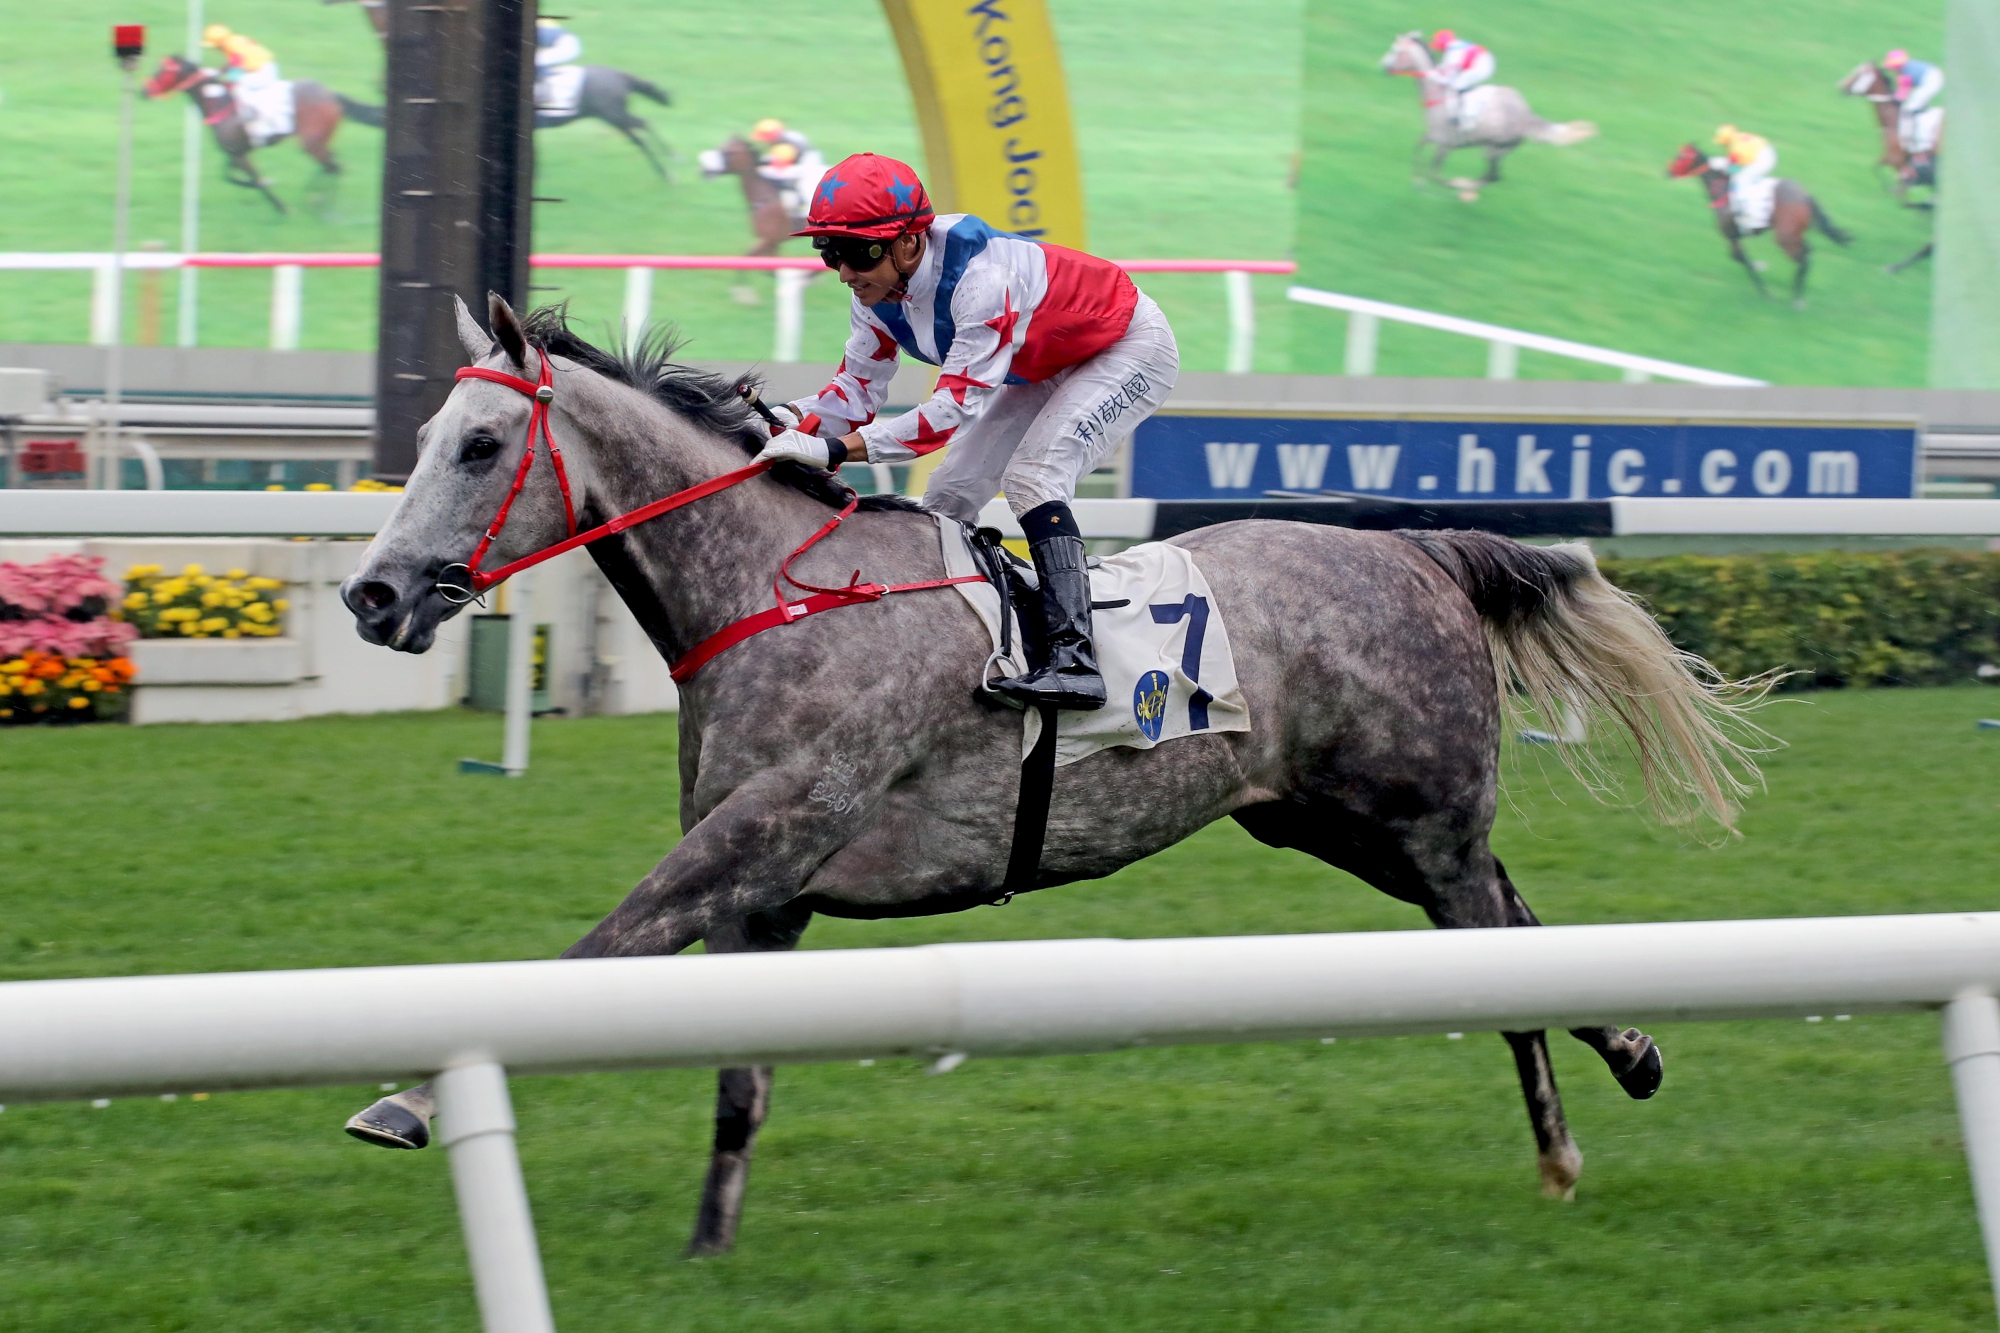 Big Party – HK : 2019 (December) G3 Bauhinia Sprint Trophy winner who can display a strong turn-of-foot on his day.